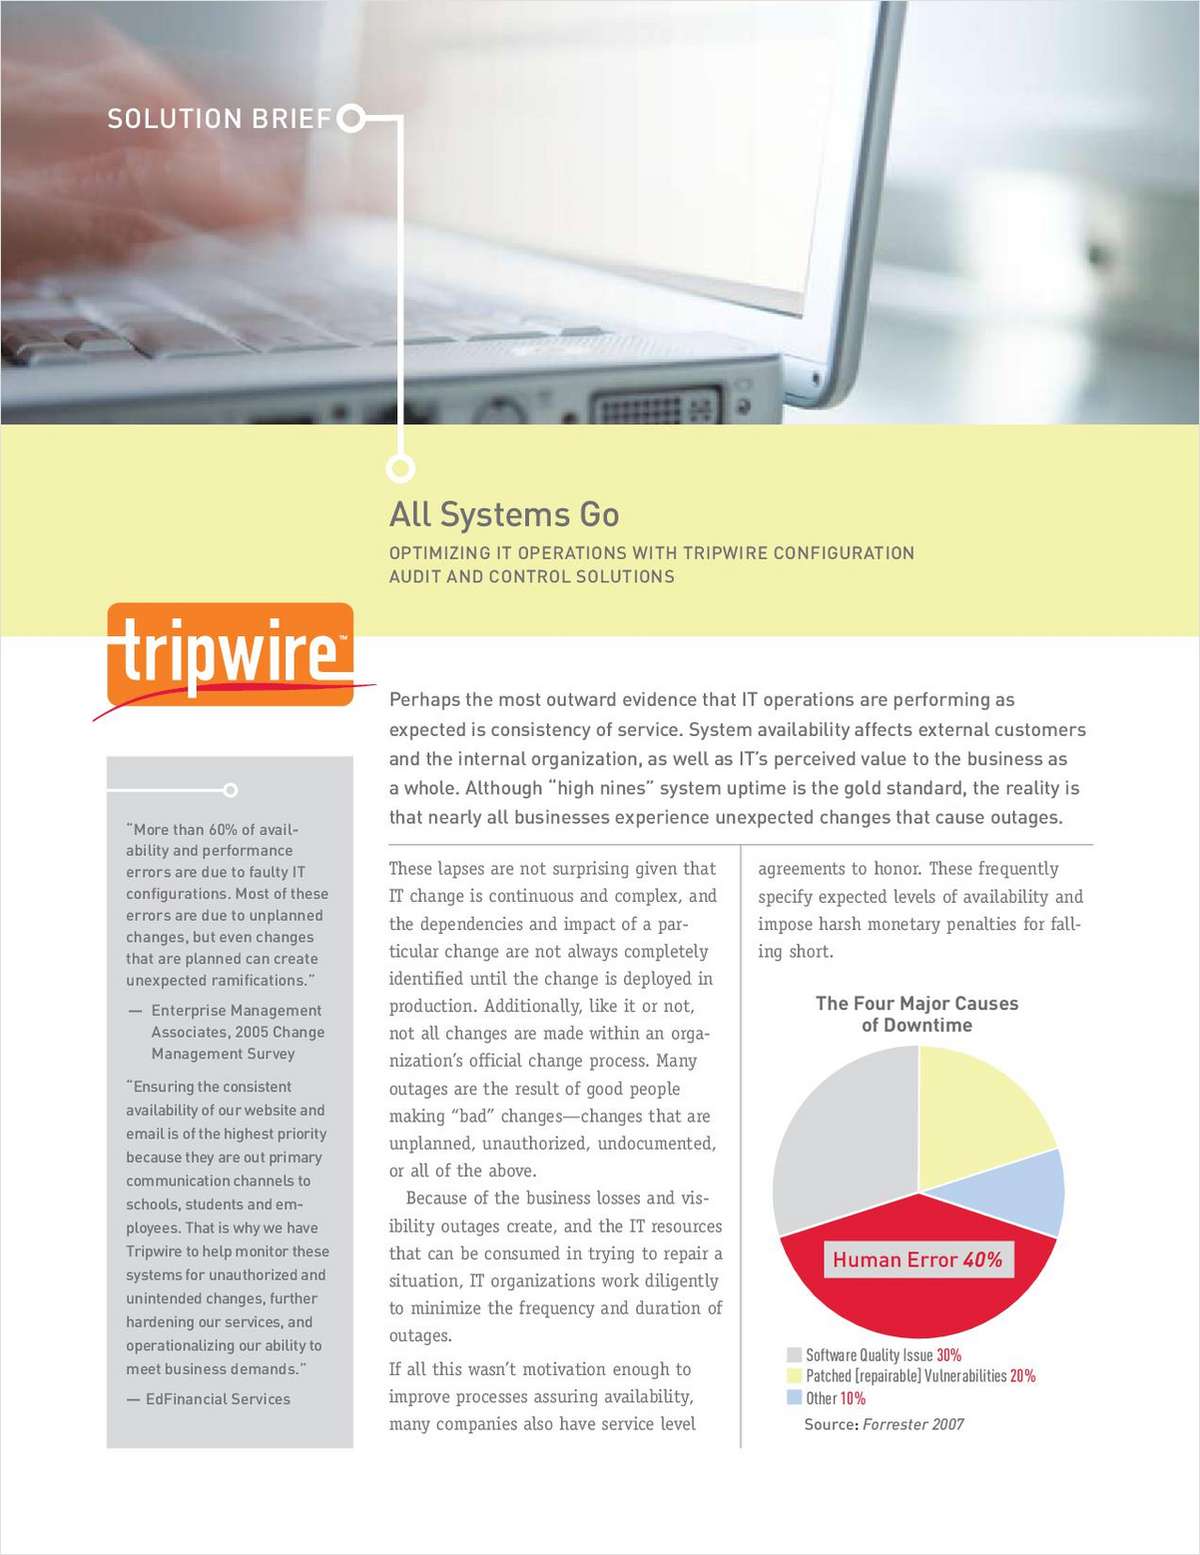 All Systems Go: Optimizing IT Operations with Tripwire